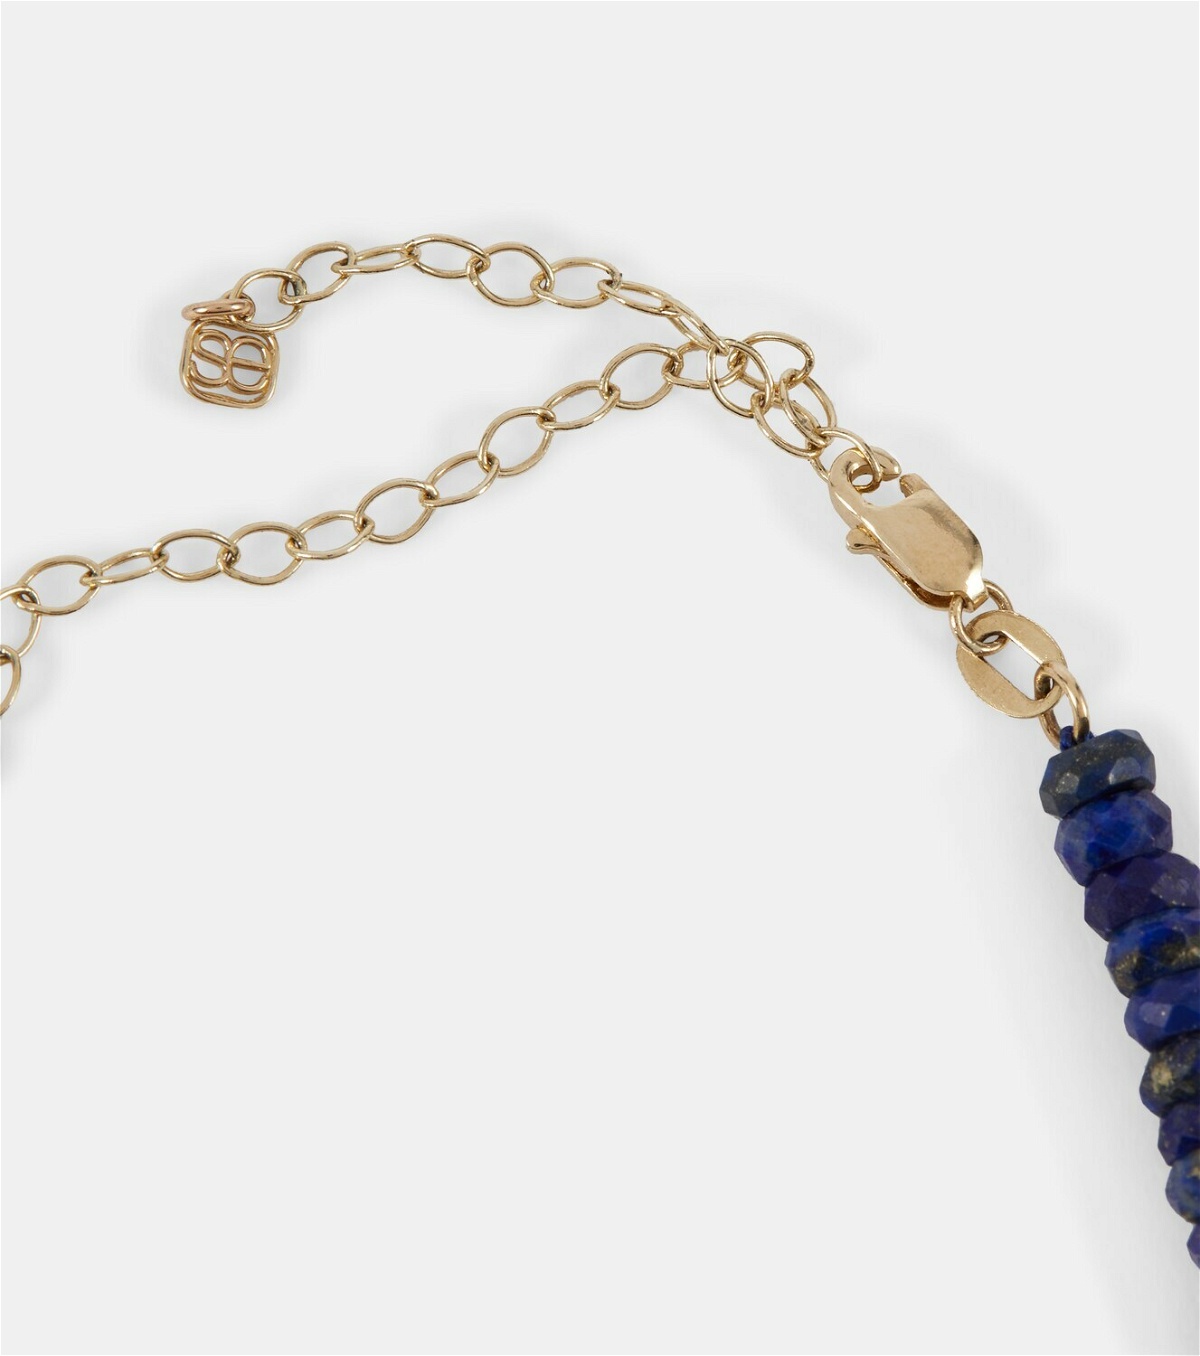 Sydney Evan 14kt gold beaded necklace with diamonds and lapis